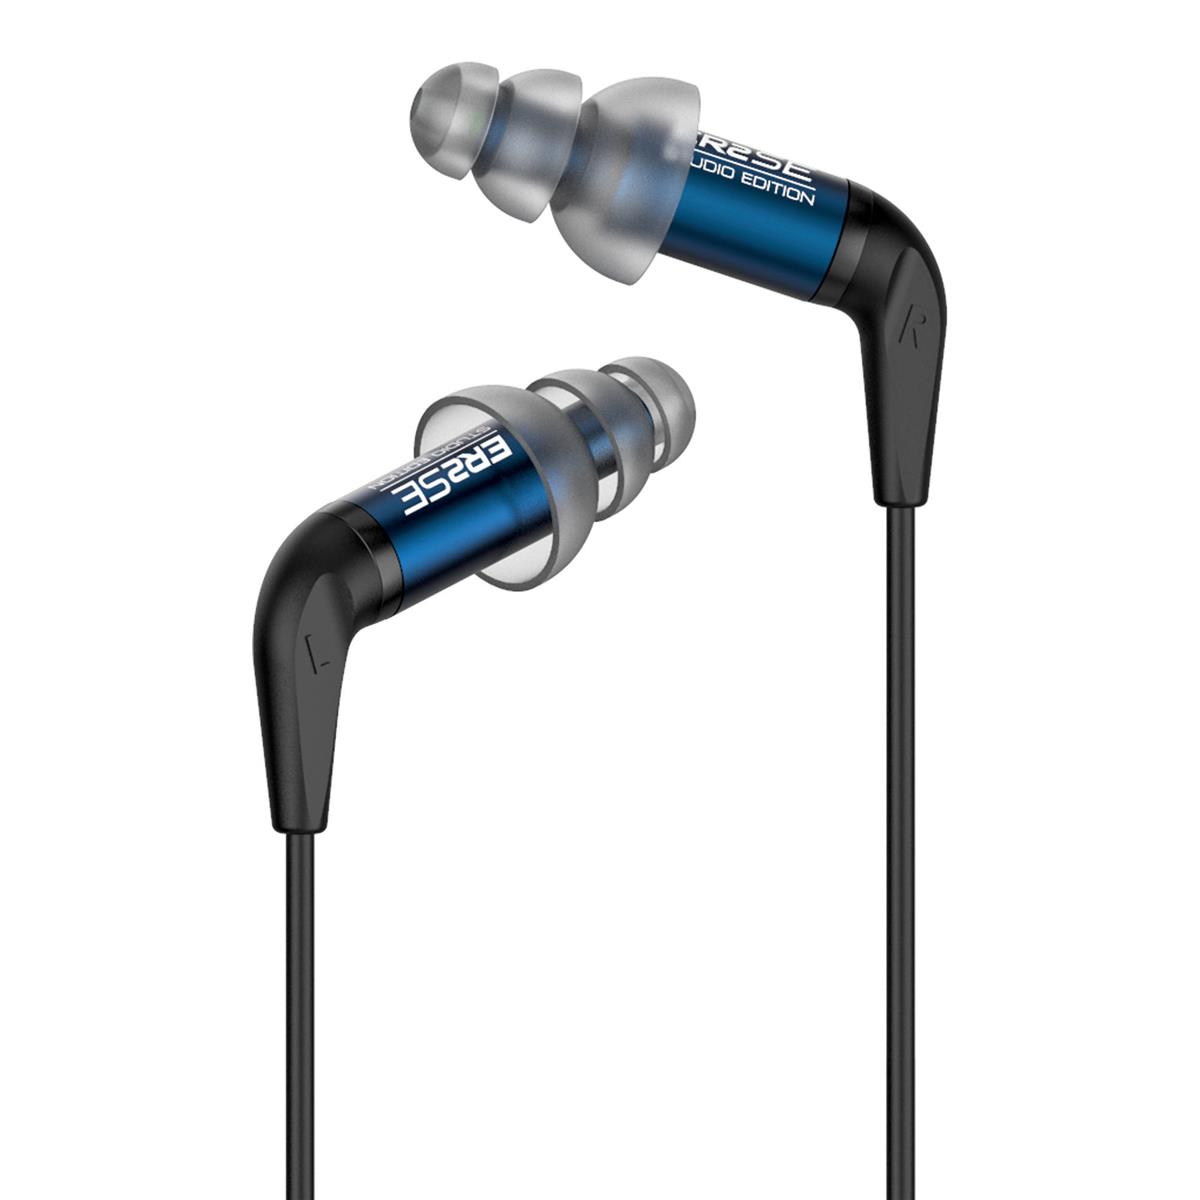 Image of Etymotic Research ER2XR Dynamic Extended Response Earphones